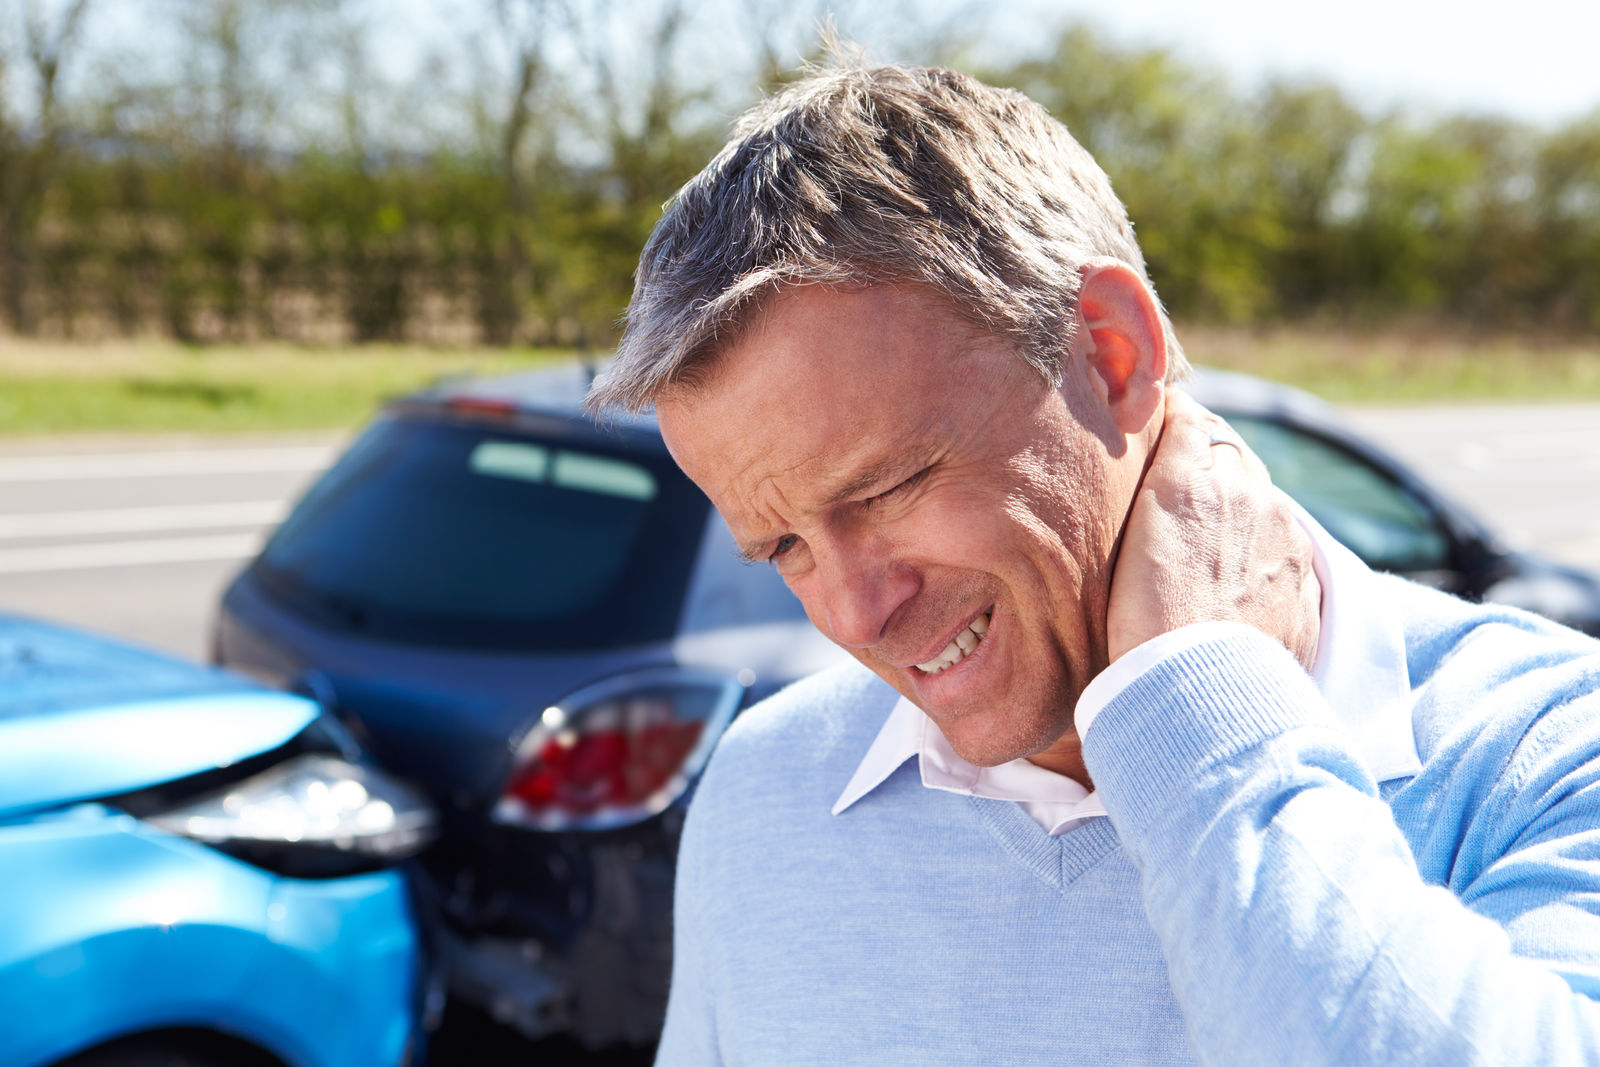 How to Reduce Car Insurance After Accident